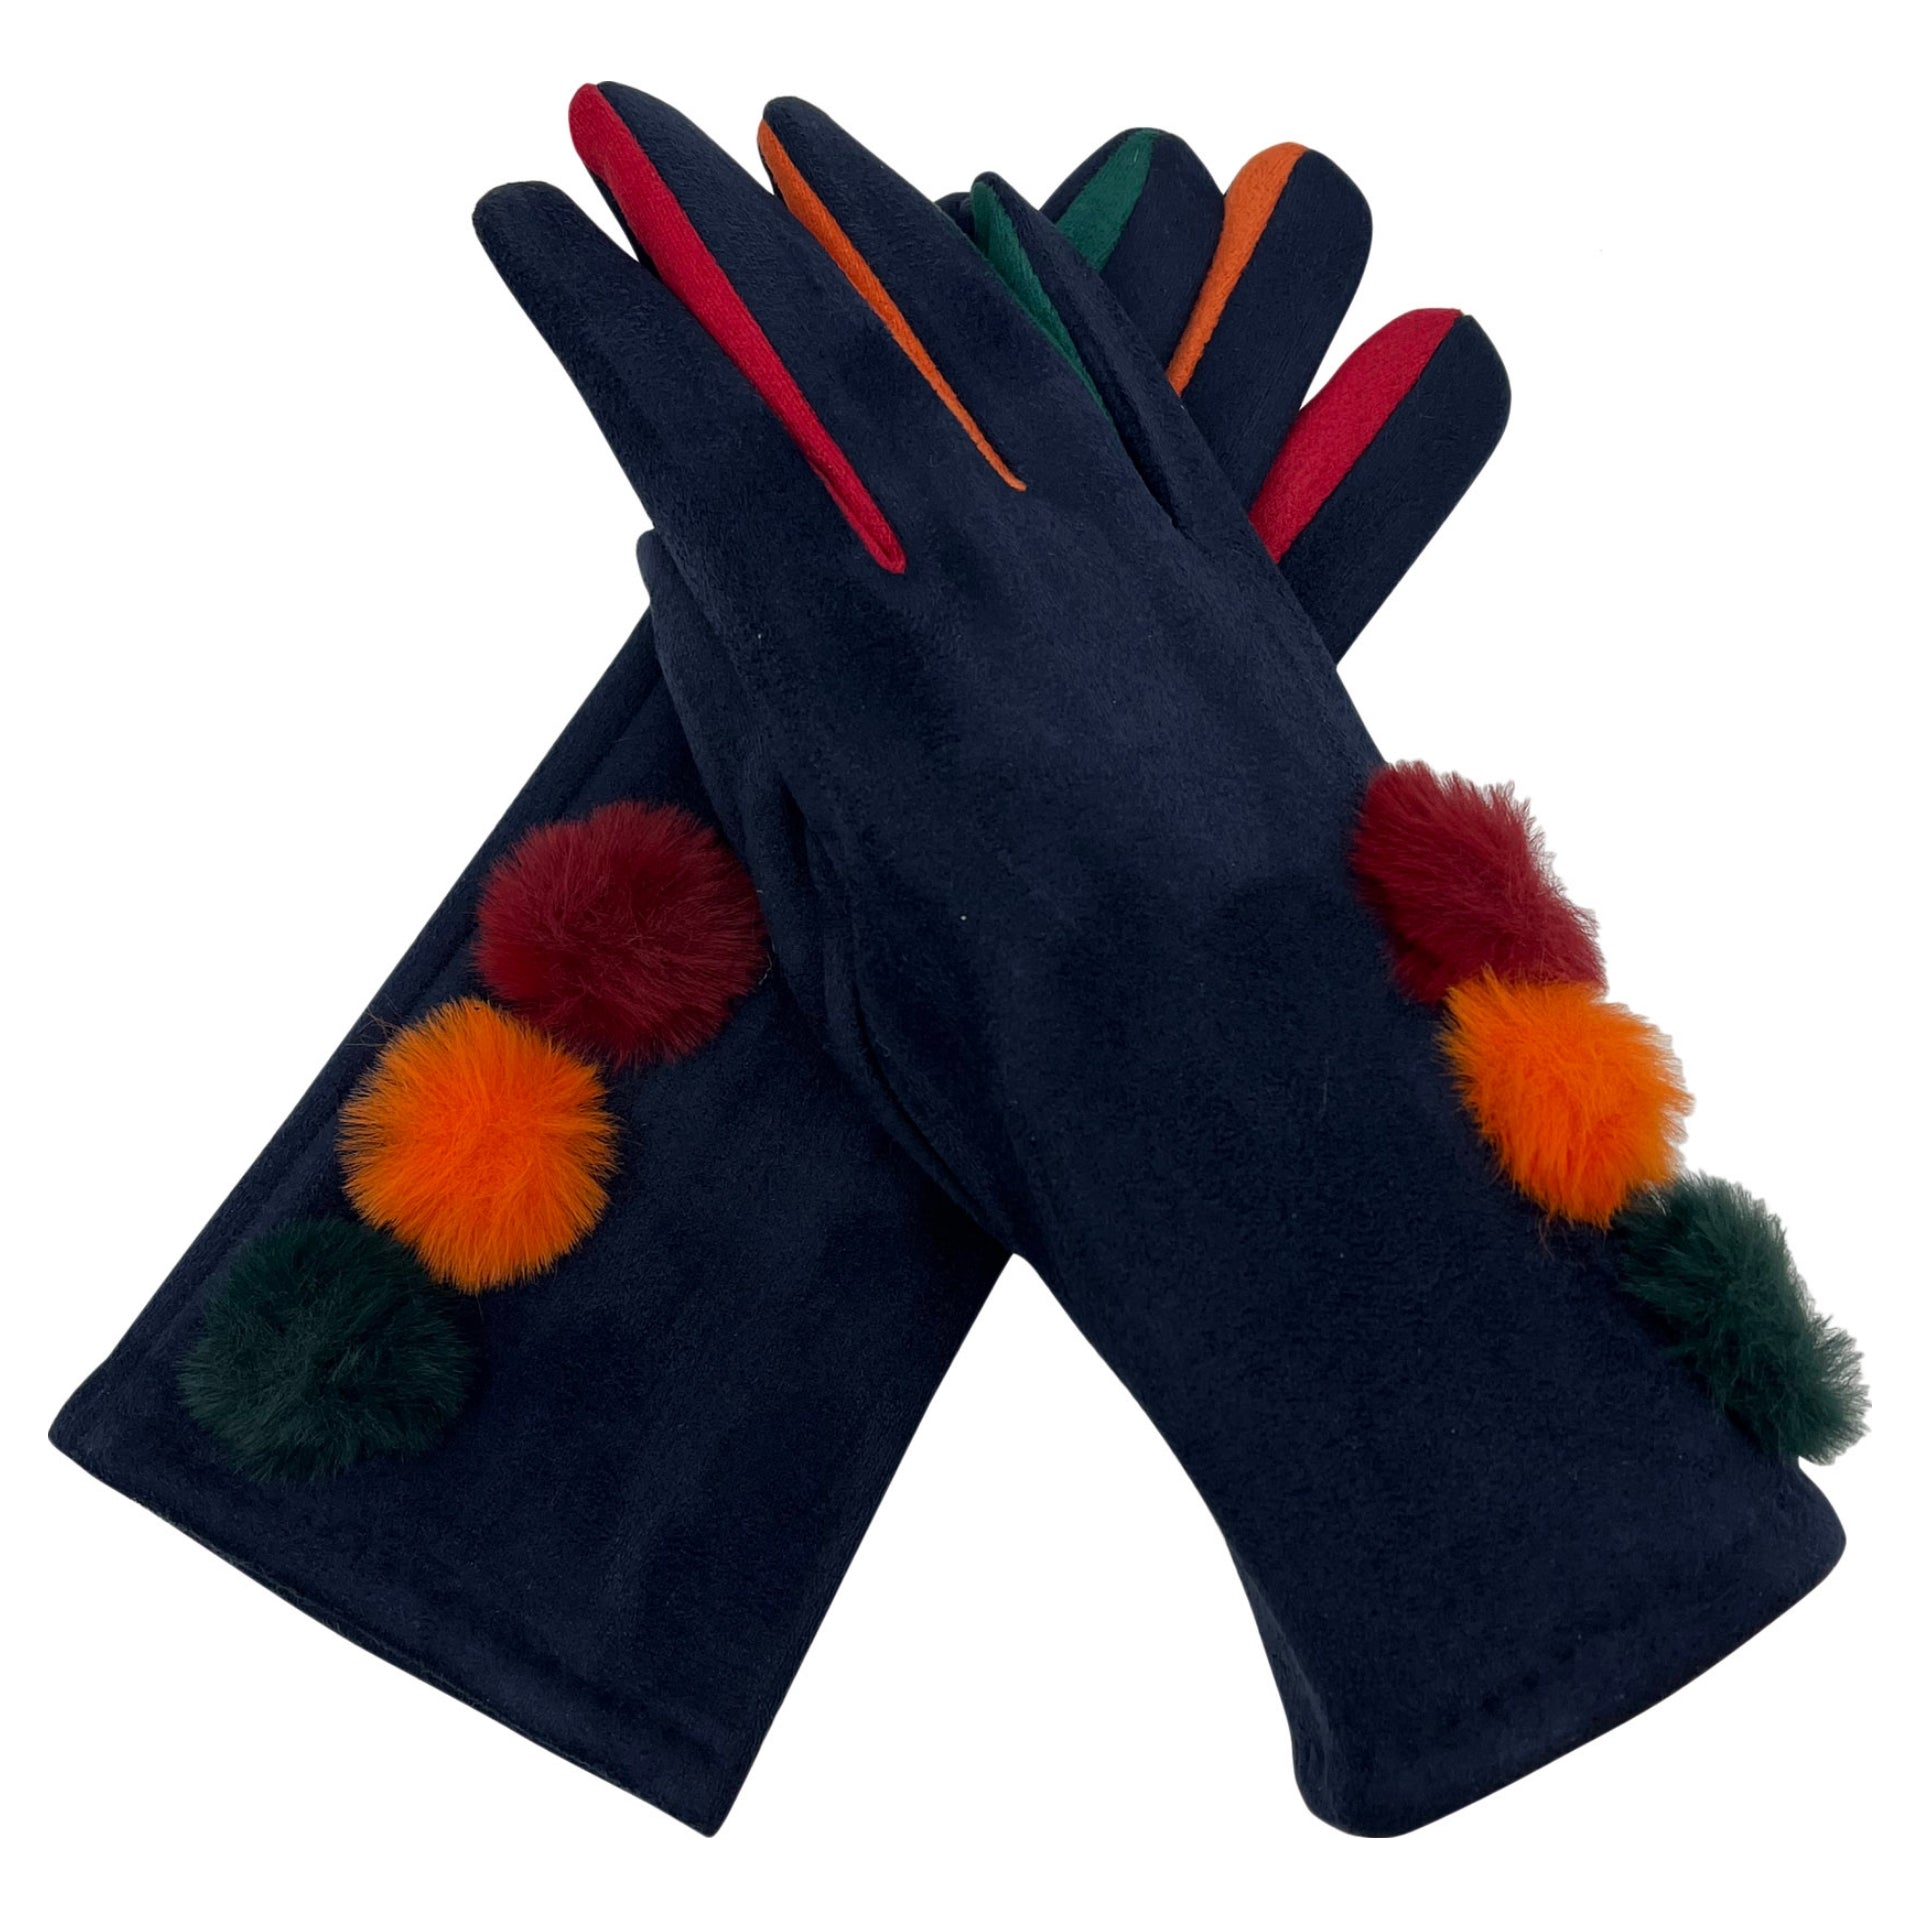 Ladies Soft Synthetic Leather Gloves Walking Driving Winter Warm Fur Lined navy